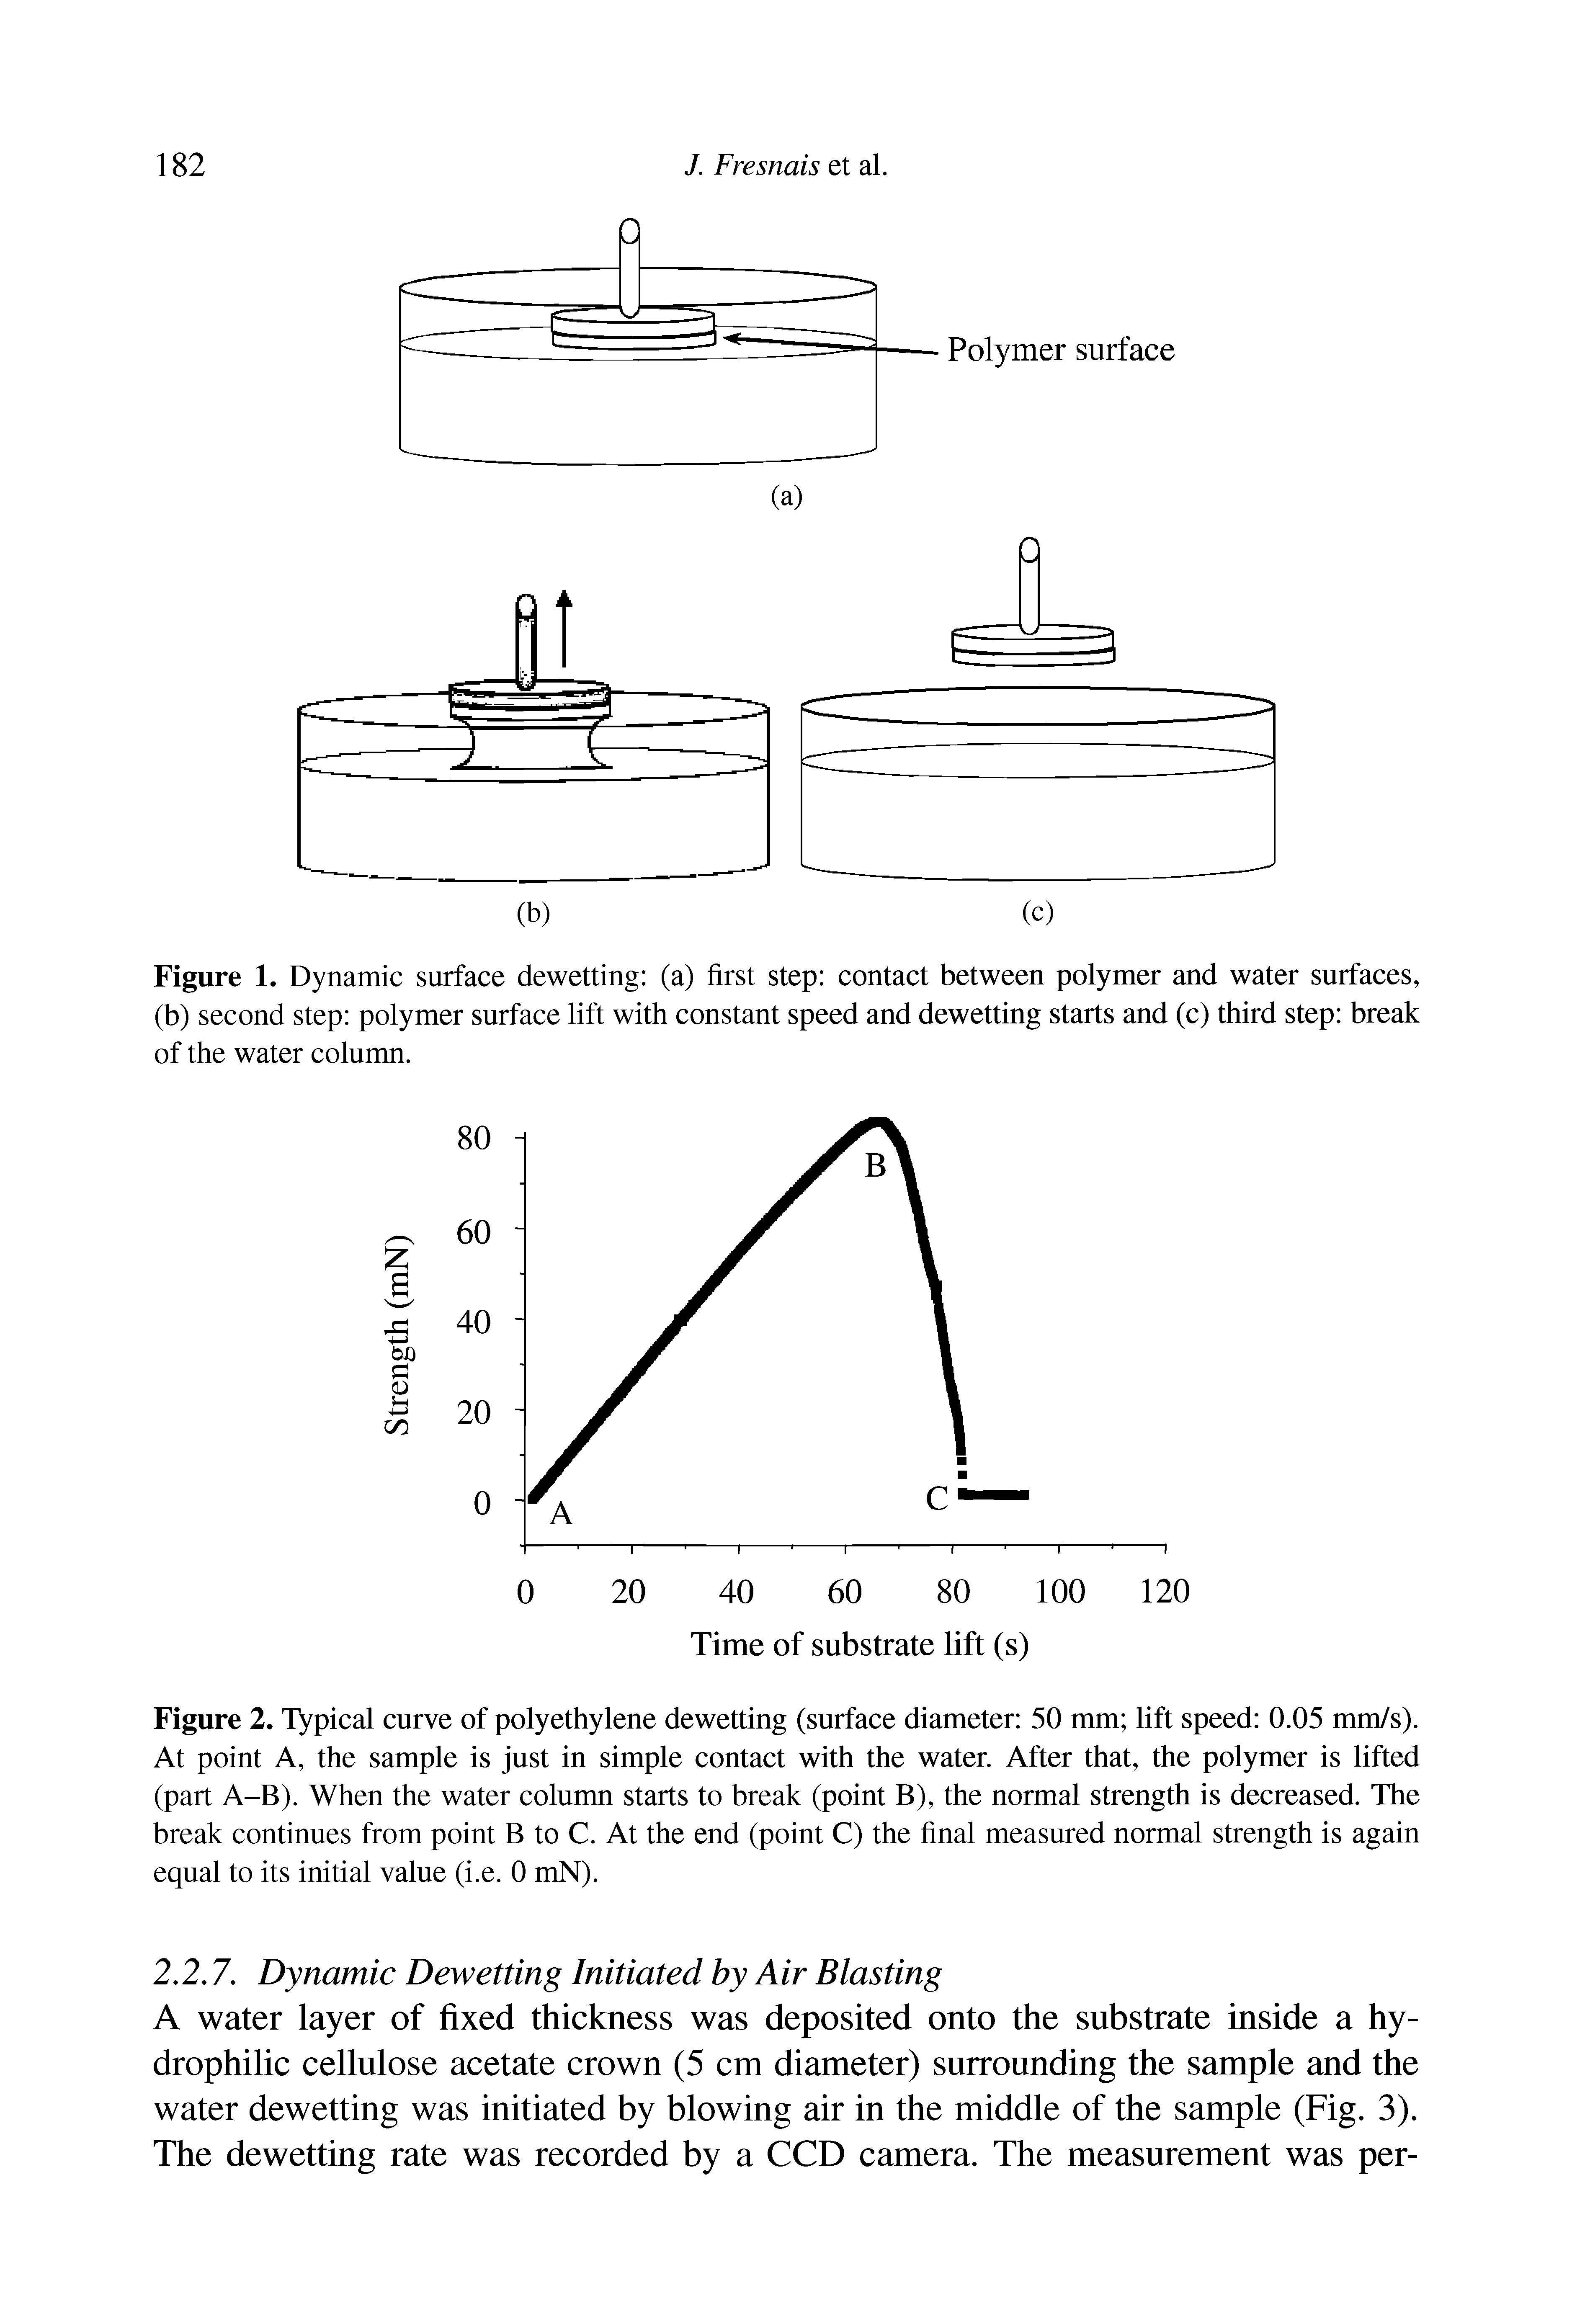 Figure 2. Typical curve of polyethylene dewetting (surface diameter 50 mm lift speed 0.05 mm/s). At point A, the sample is just in simple contact with the water. After that, the polymer is lifted (part A-B). When the water column starts to break (point B), the normal strength is decreased. The break continues from point B to C. At the end (point C) the final measured normal strength is again equal to its initial value (i.e. 0 mN).